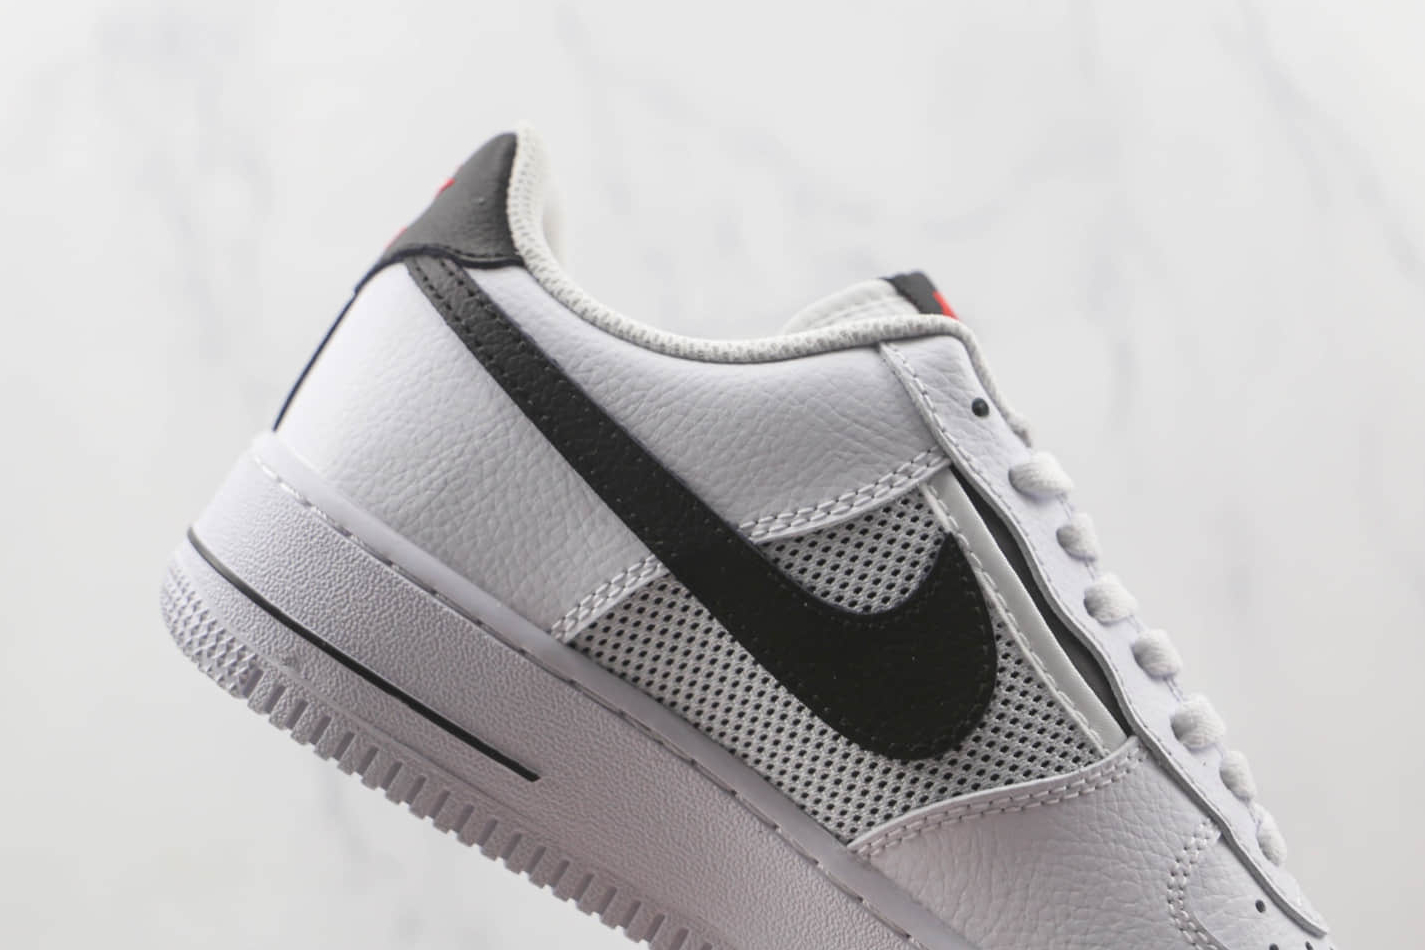 Nike Air Force 1 Low '07 LV8 'White Black' DH7567-100 | Stylish Sneakers